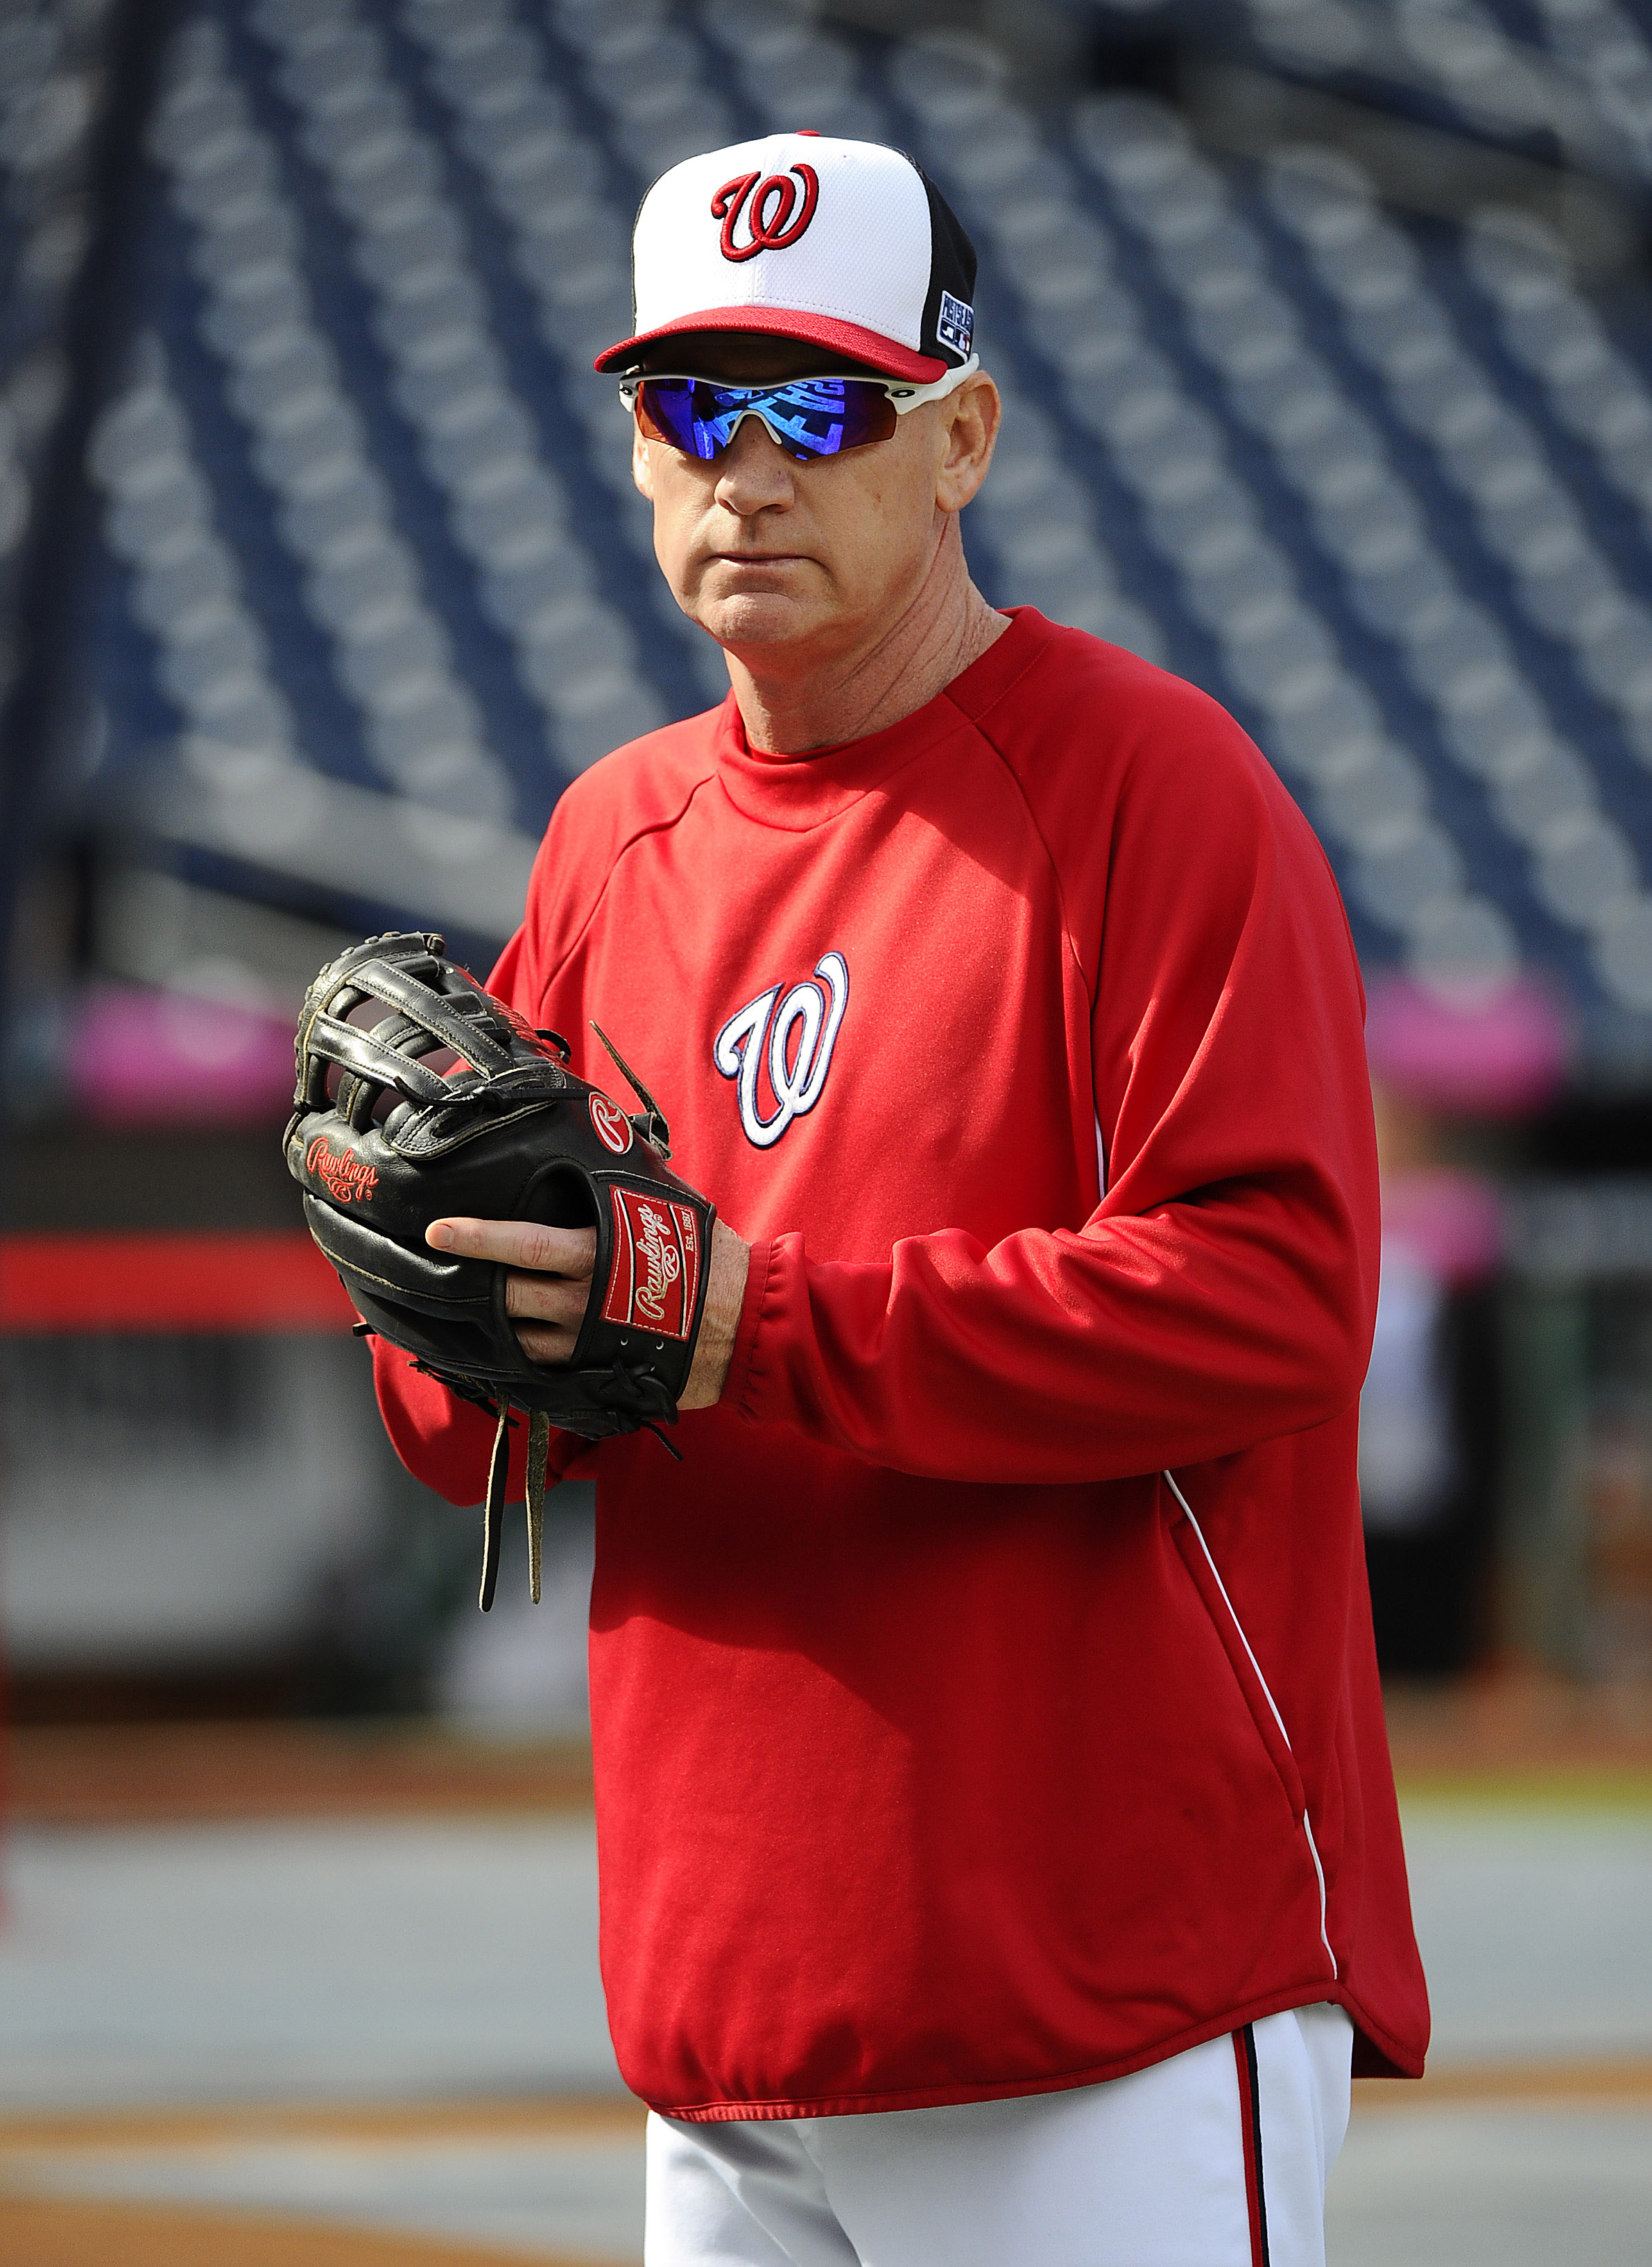 Matt Williams of the Nationals is an NL Manager of the Year finalist. (USA TODAY Sports)